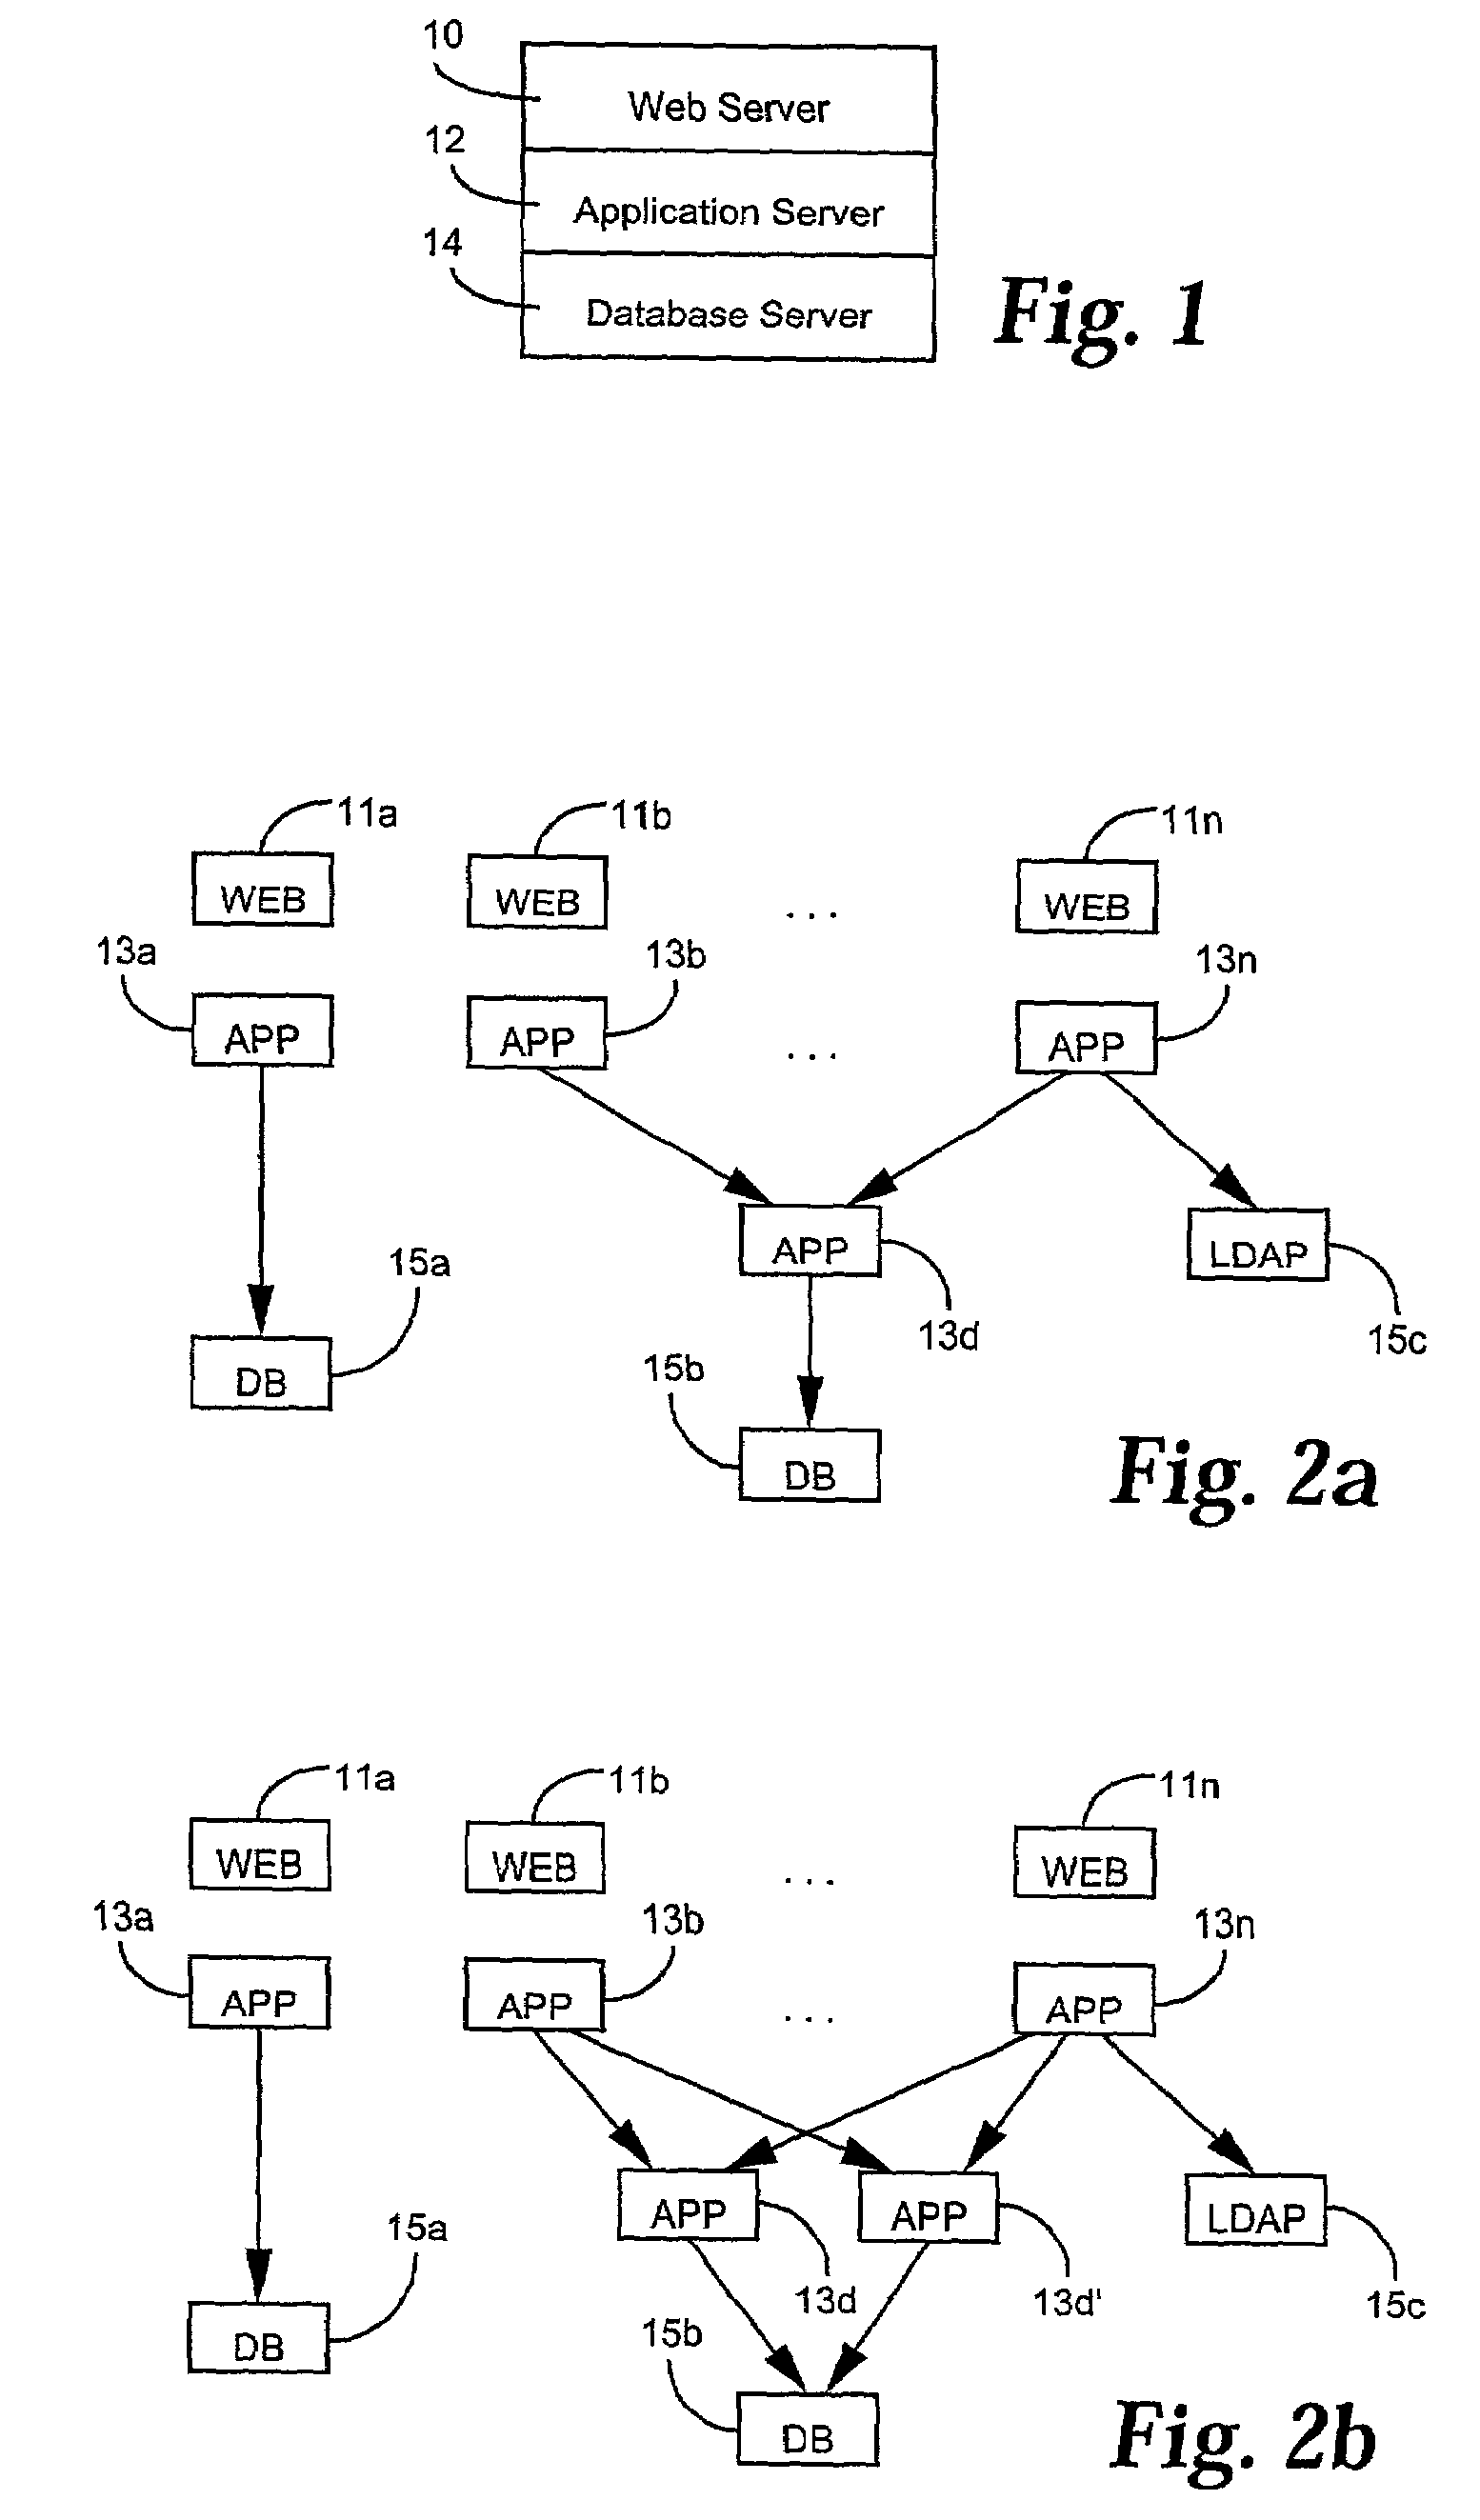 Automated provisioning of computing networks according to customer accounts using a network database data model